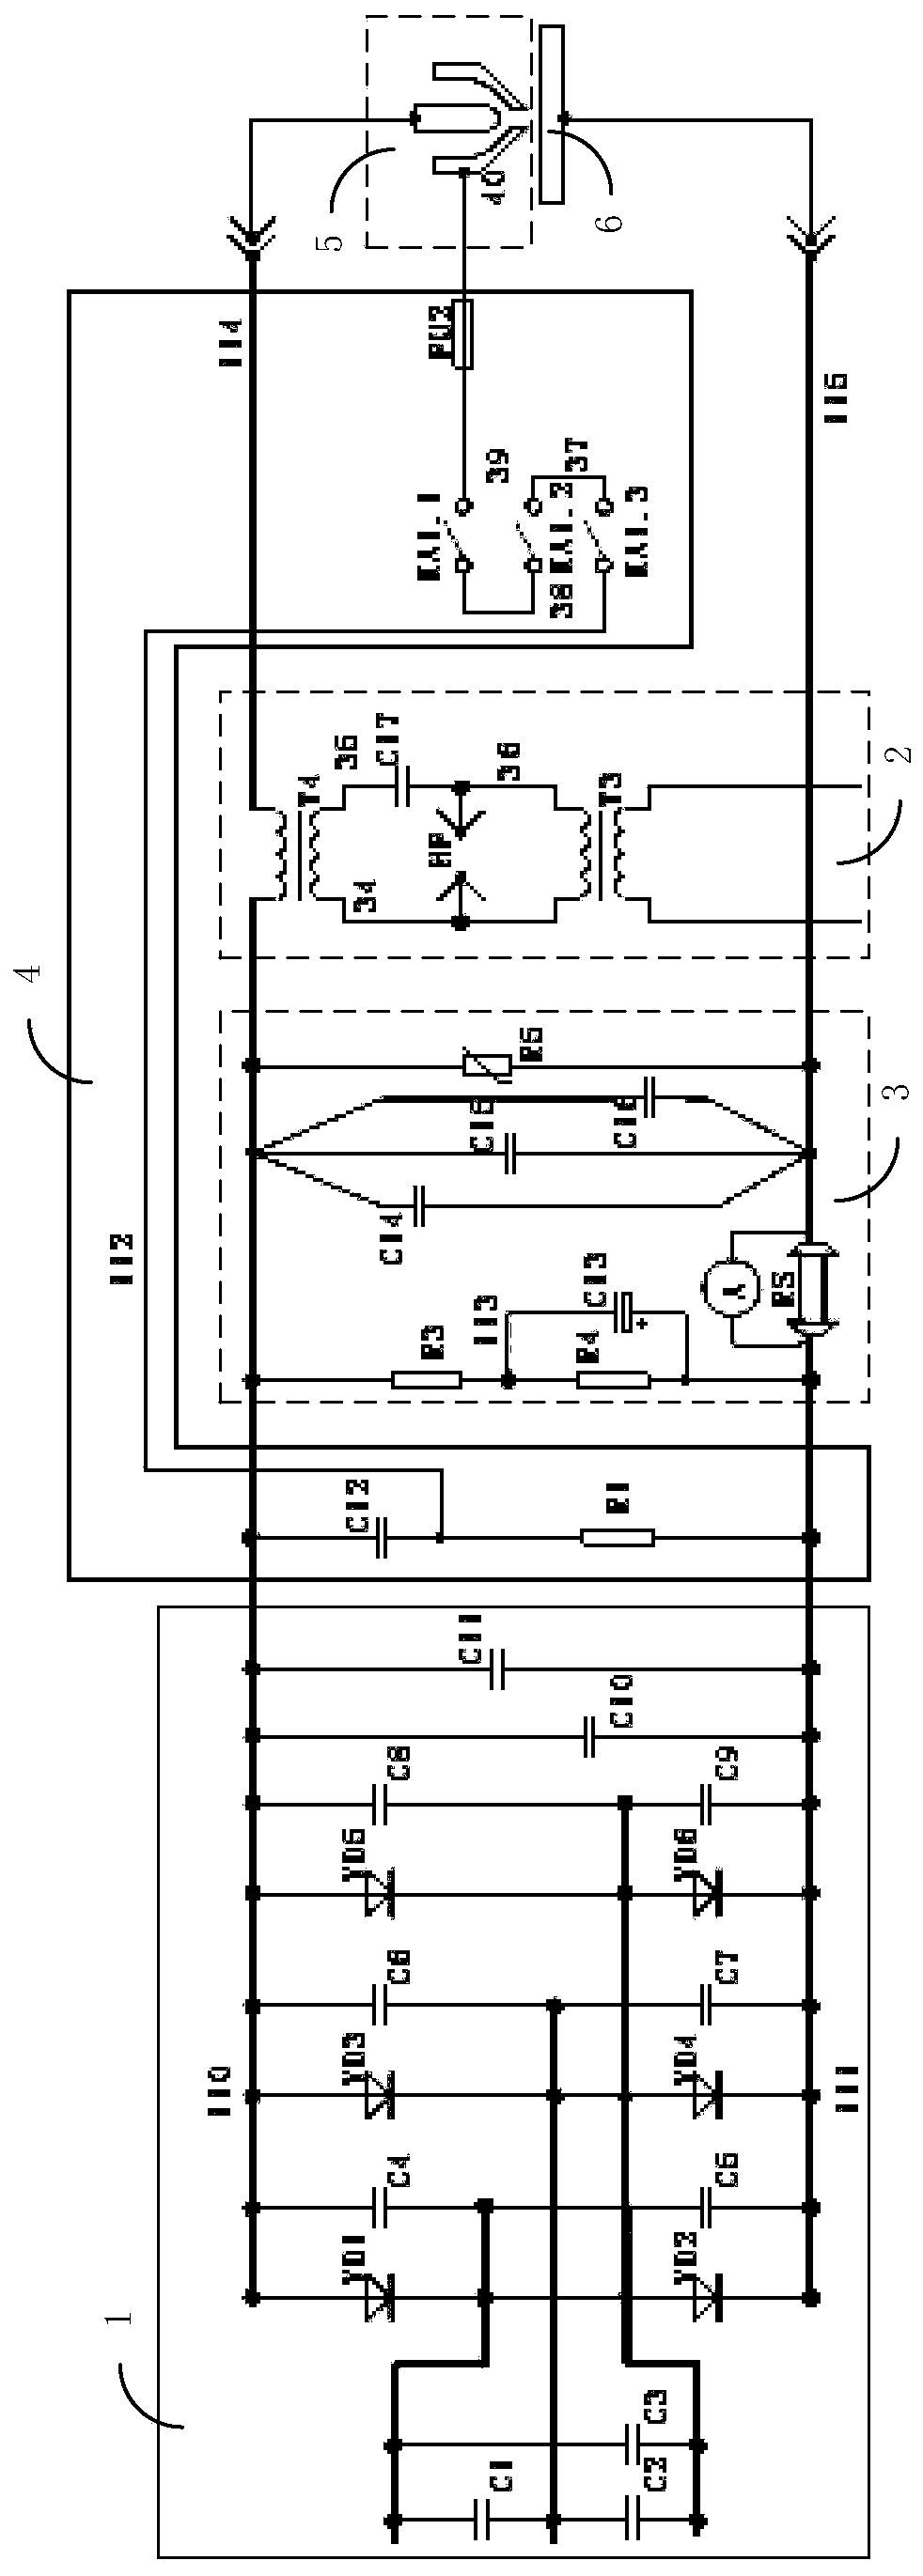 Control circuit for automatic high-frequency interference resistance of induced arc of plasma cutting machine